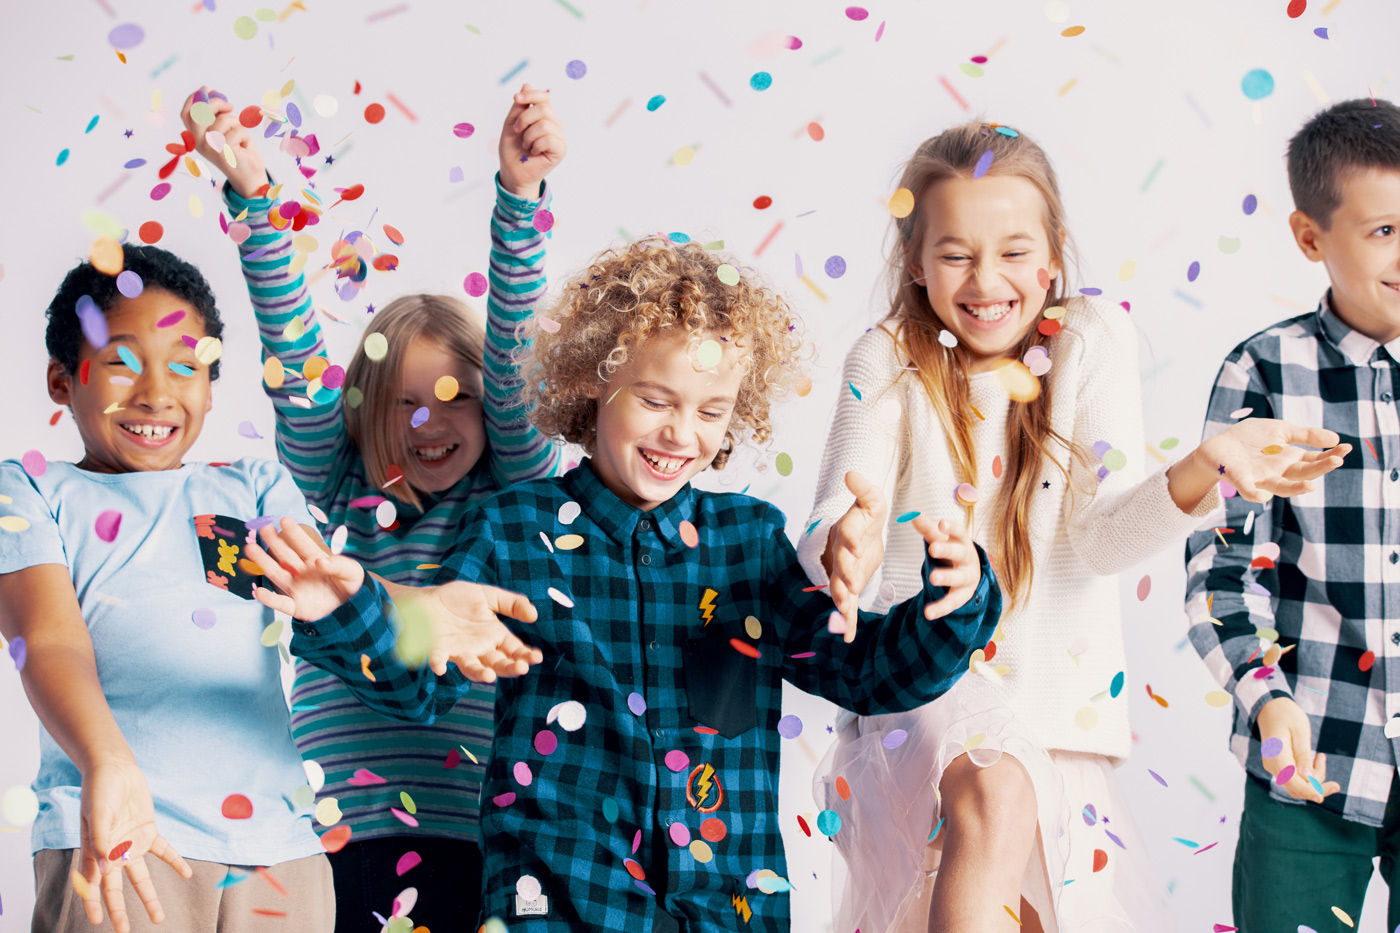 Celebrate the New Year with your kids when you stay at the Comfort Suites Regina accommodations.